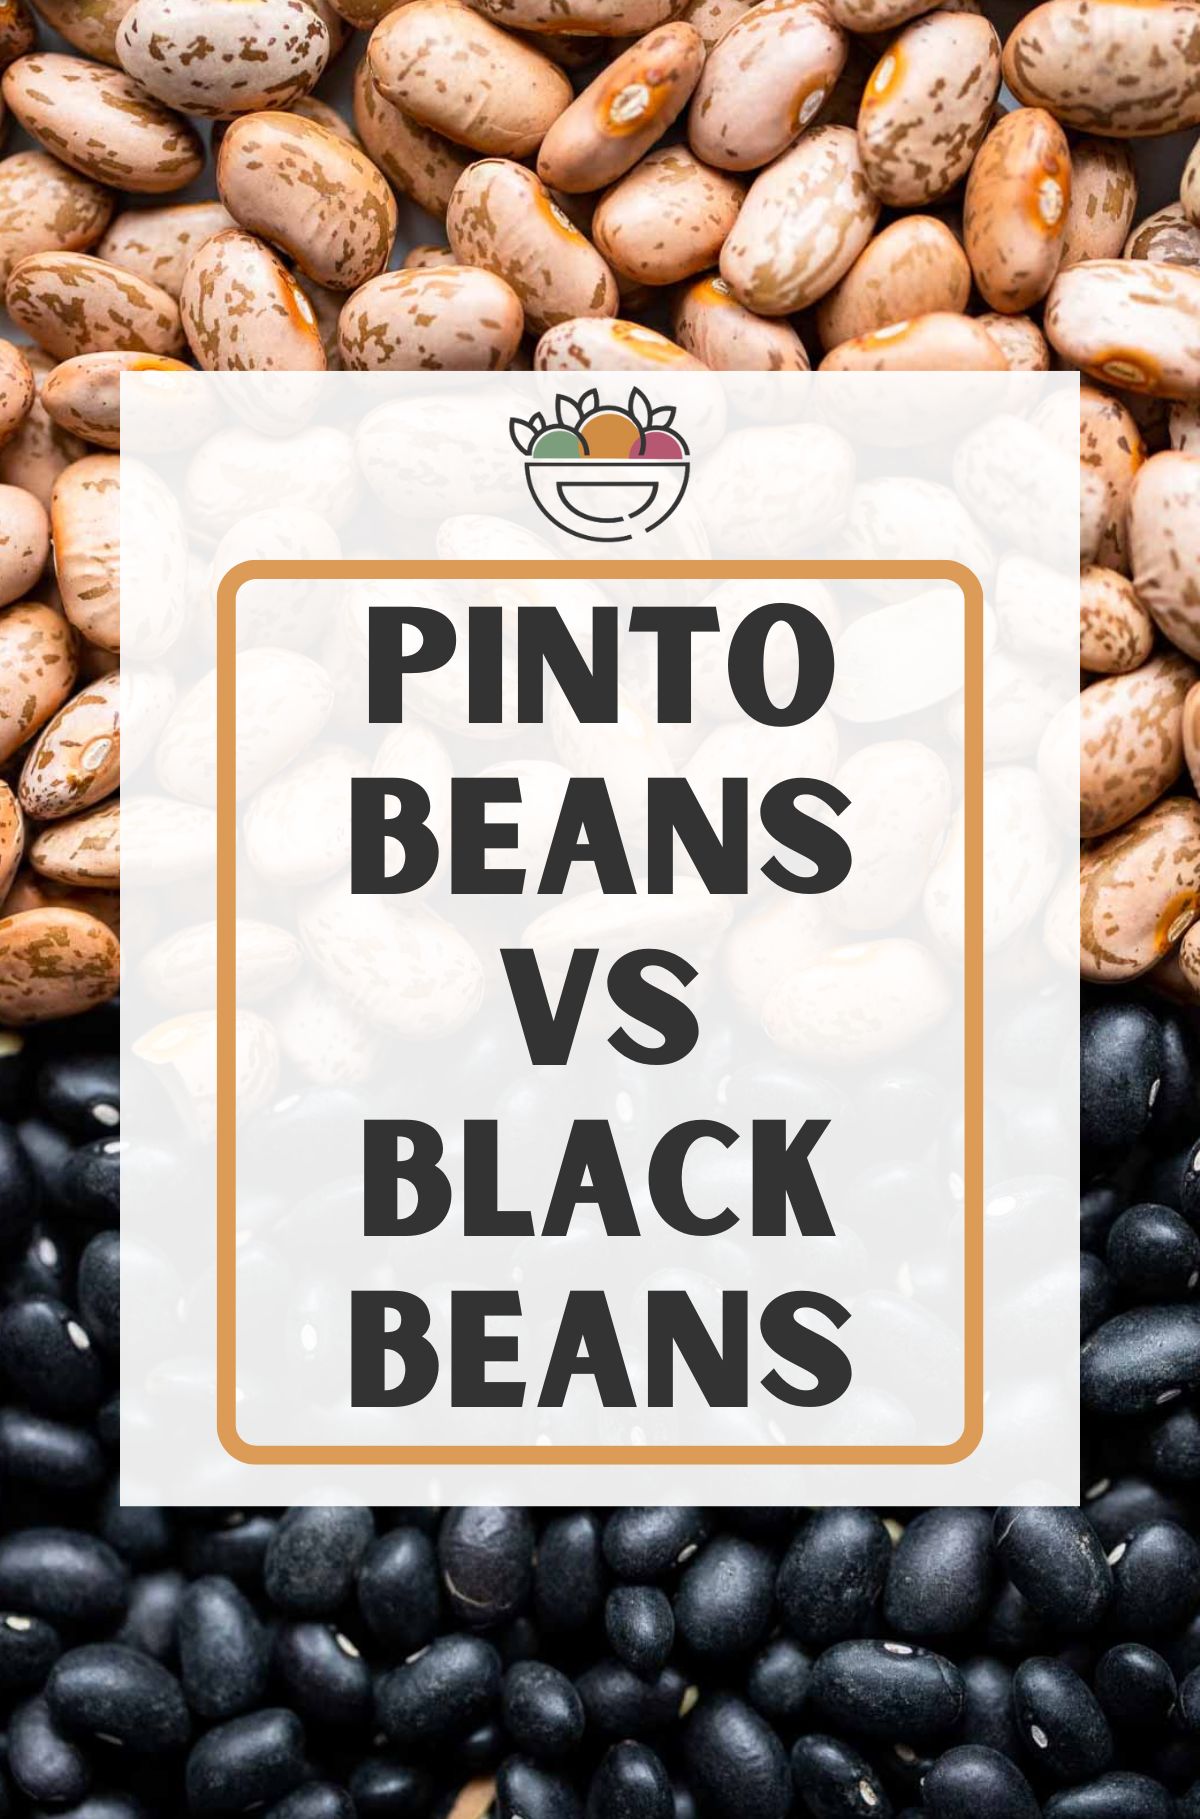 close up photo of dried pinto beans and black beans with text overlay that says pinto beans vs black beans.